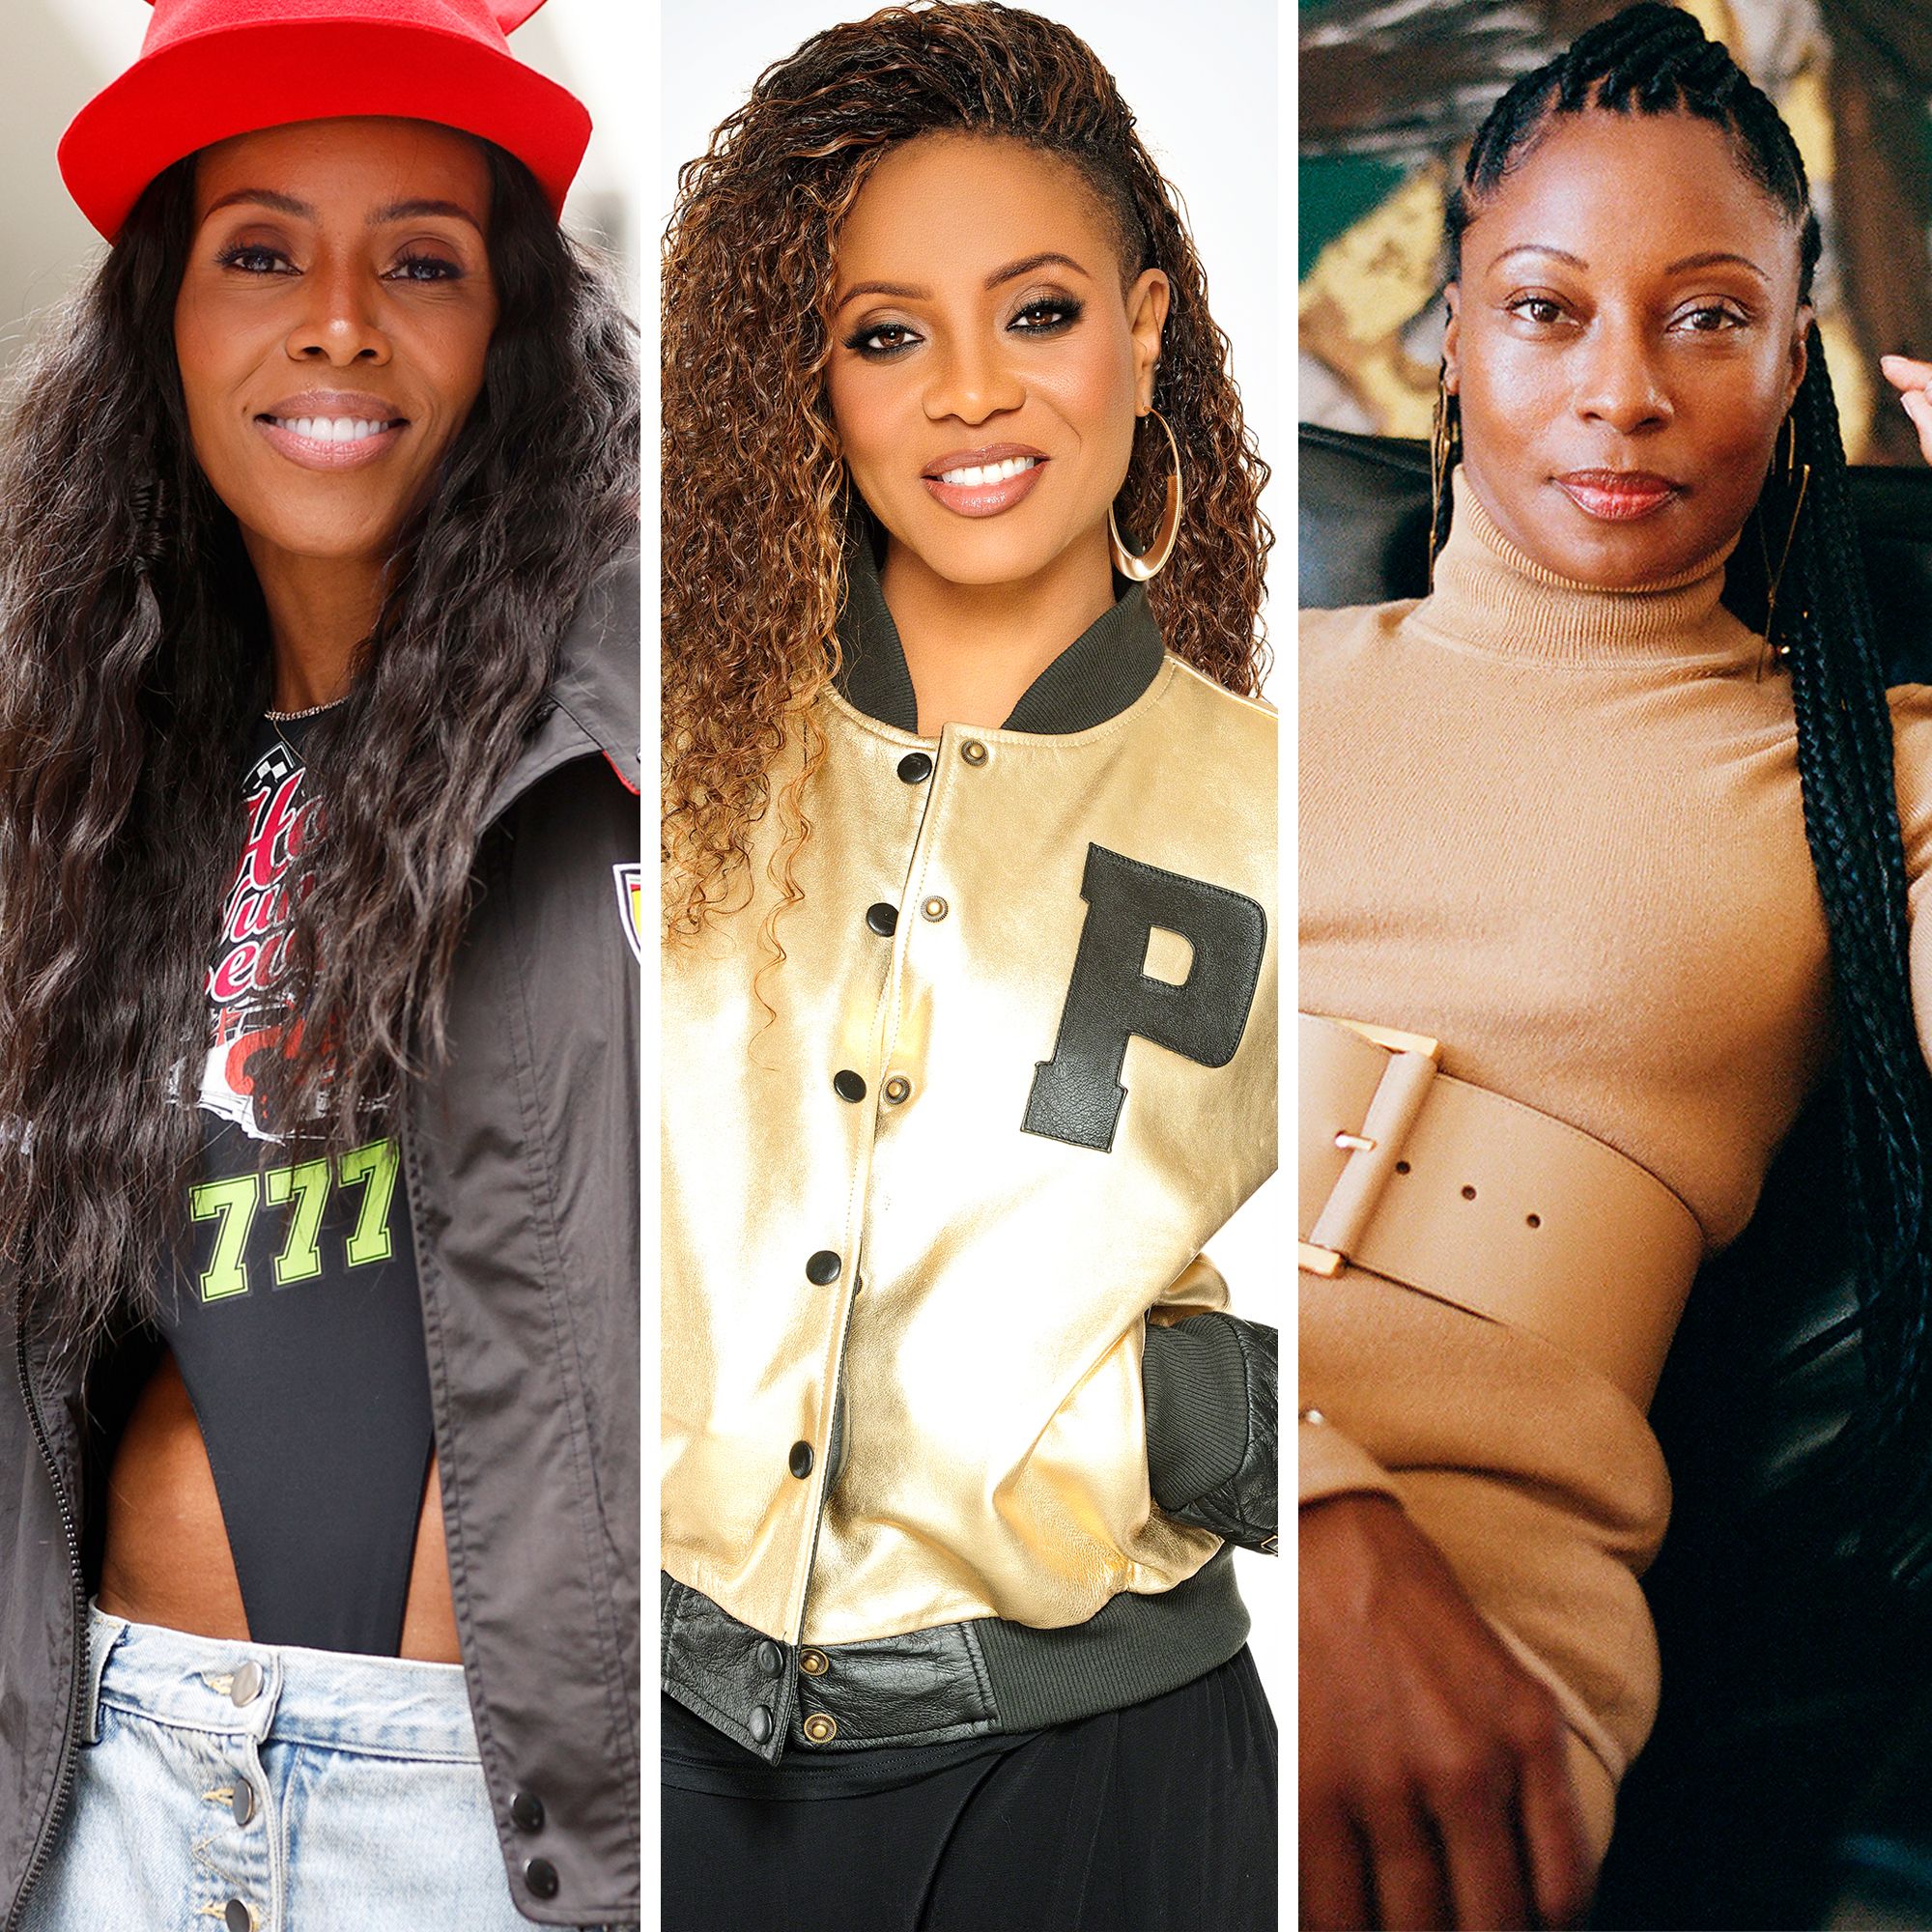 What About the Women in Hip Hop?